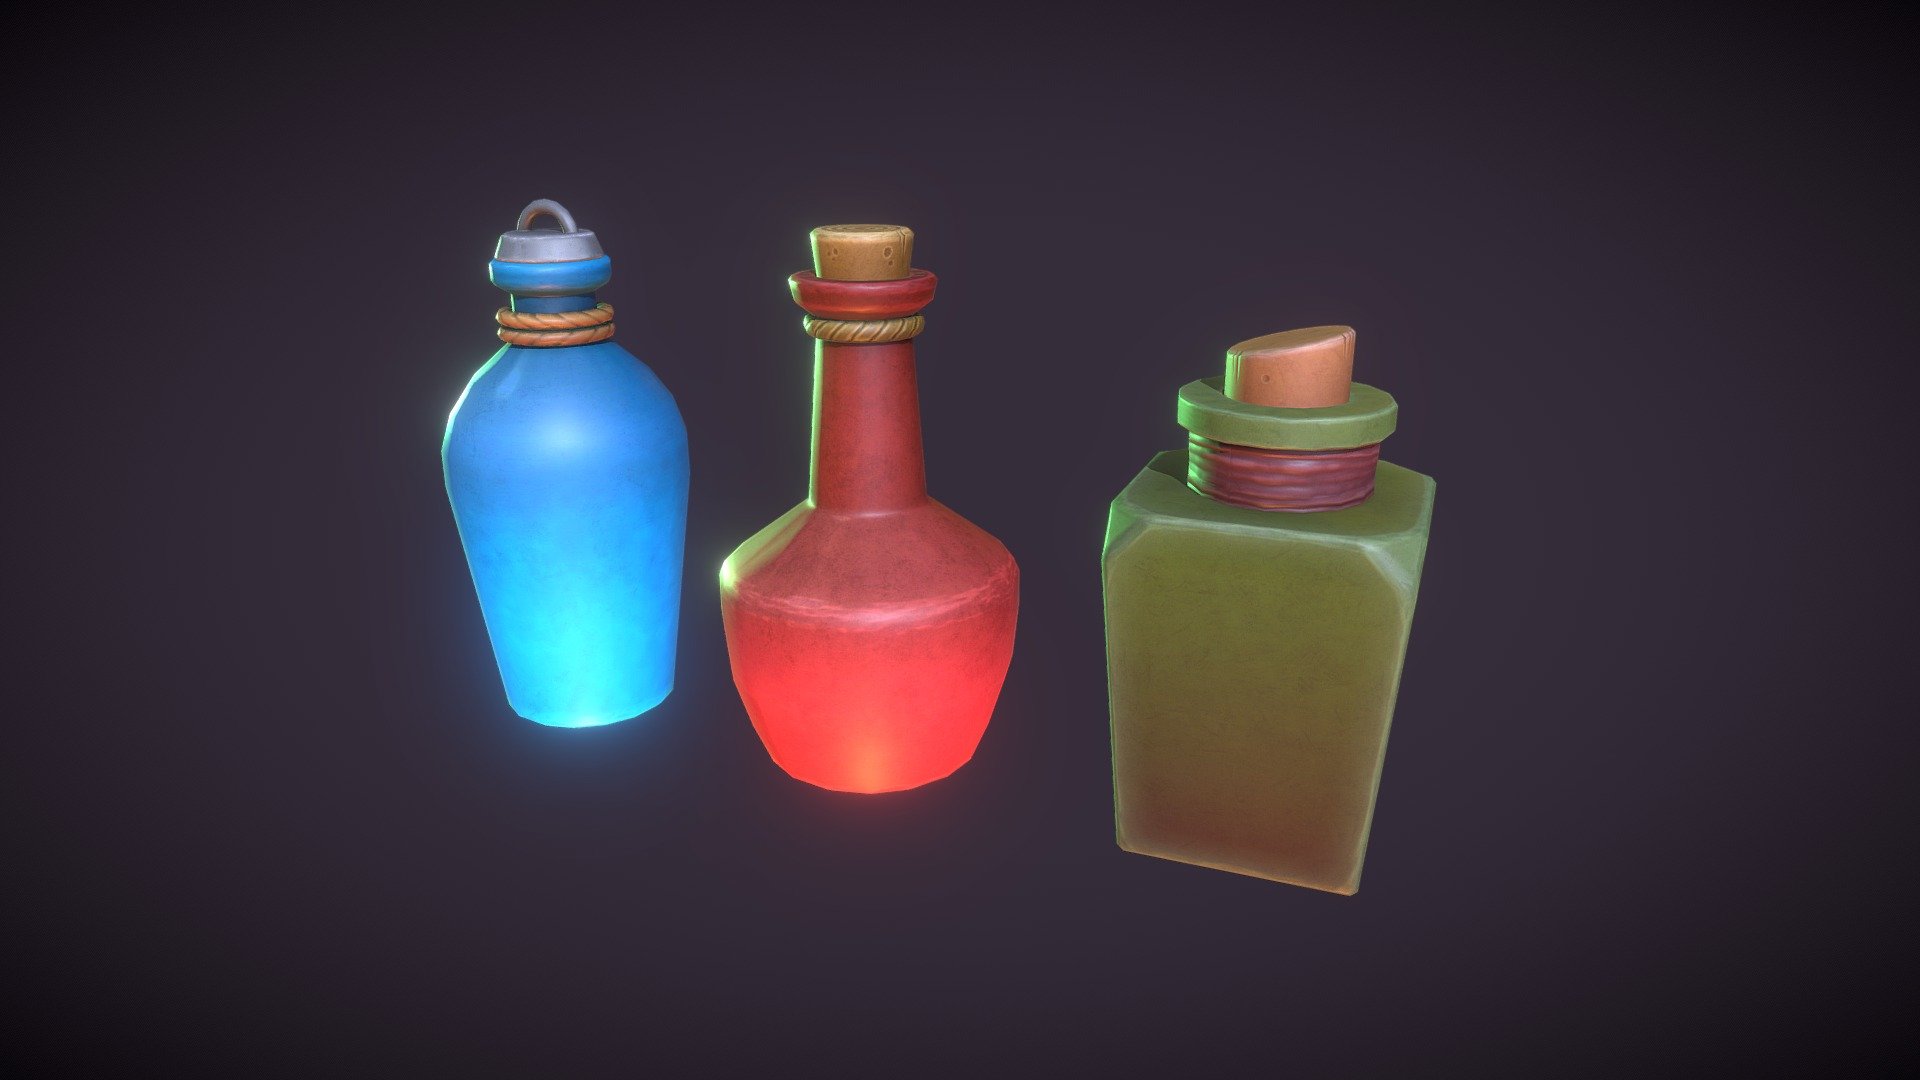 Set of three 3d potions (mana, health and poison) with opening animations and particle system (Unity 3D)

• 2k textures (Albedo, Normals and AO).

• Rigg joints for bottle and cork.

• Optimized models

• Animator controller for every one. (Unity 3D)

• Demo scene whit scripts for animator controller and functions for particle system in open animation. Post-processing in Main Camera (Unity 3D) | https://youtu.be/-9TClPQ6yp4 - Asset Kit - Potions (Animation & Unity files) - Buy Royalty Free 3D model by Luciano O. Mollo (@LM3D) 3d model